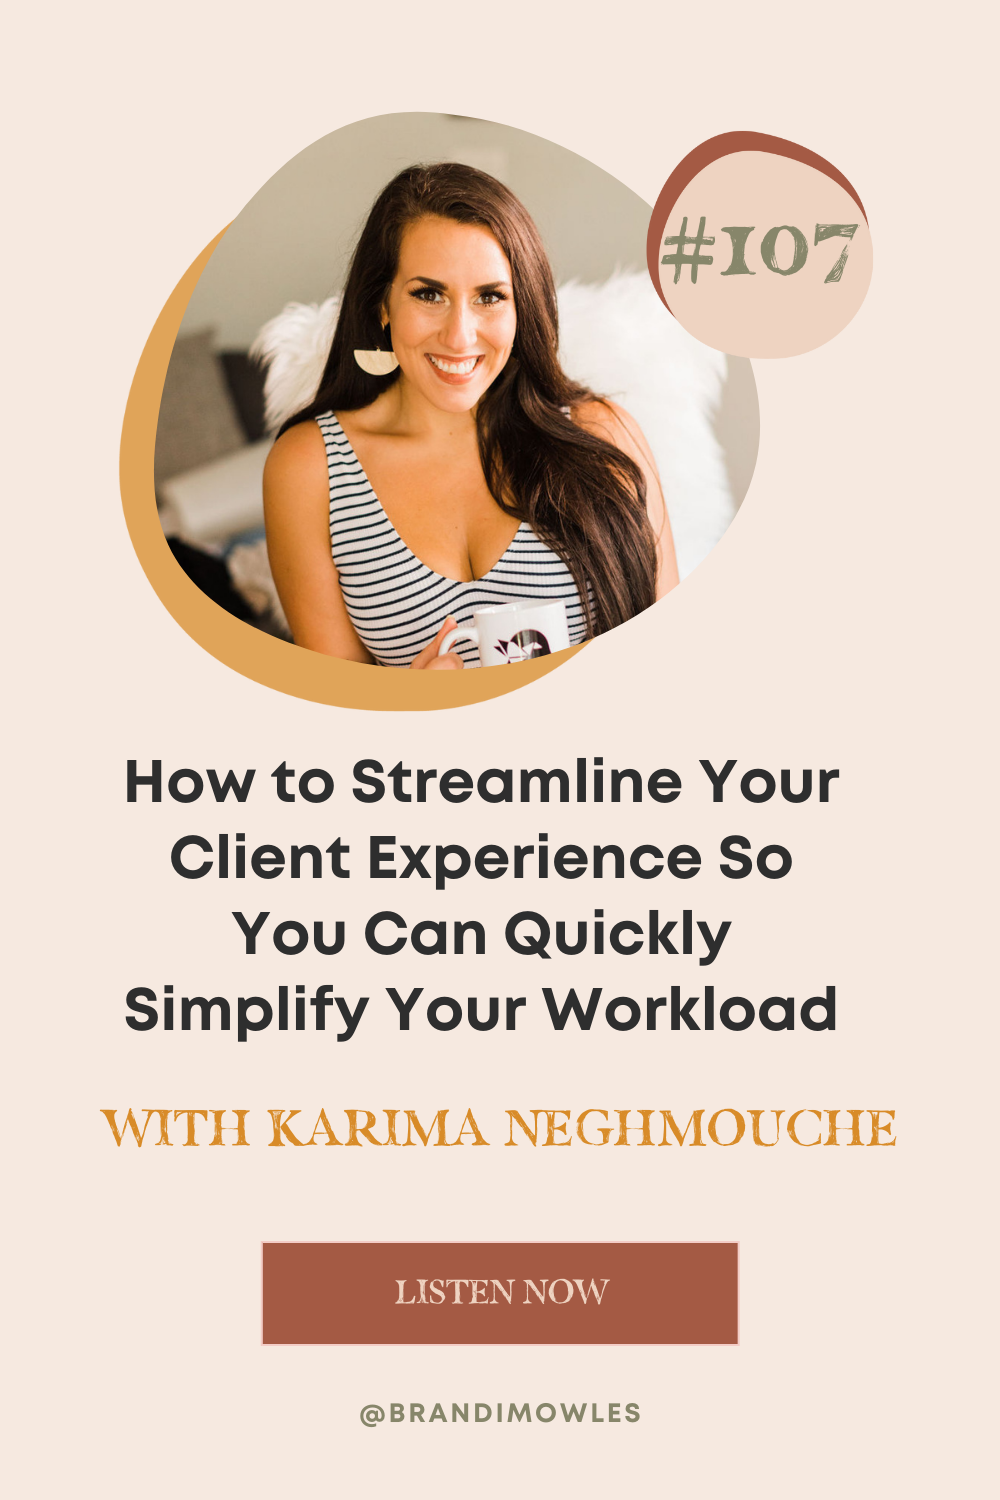 Streamline Your Client Experience